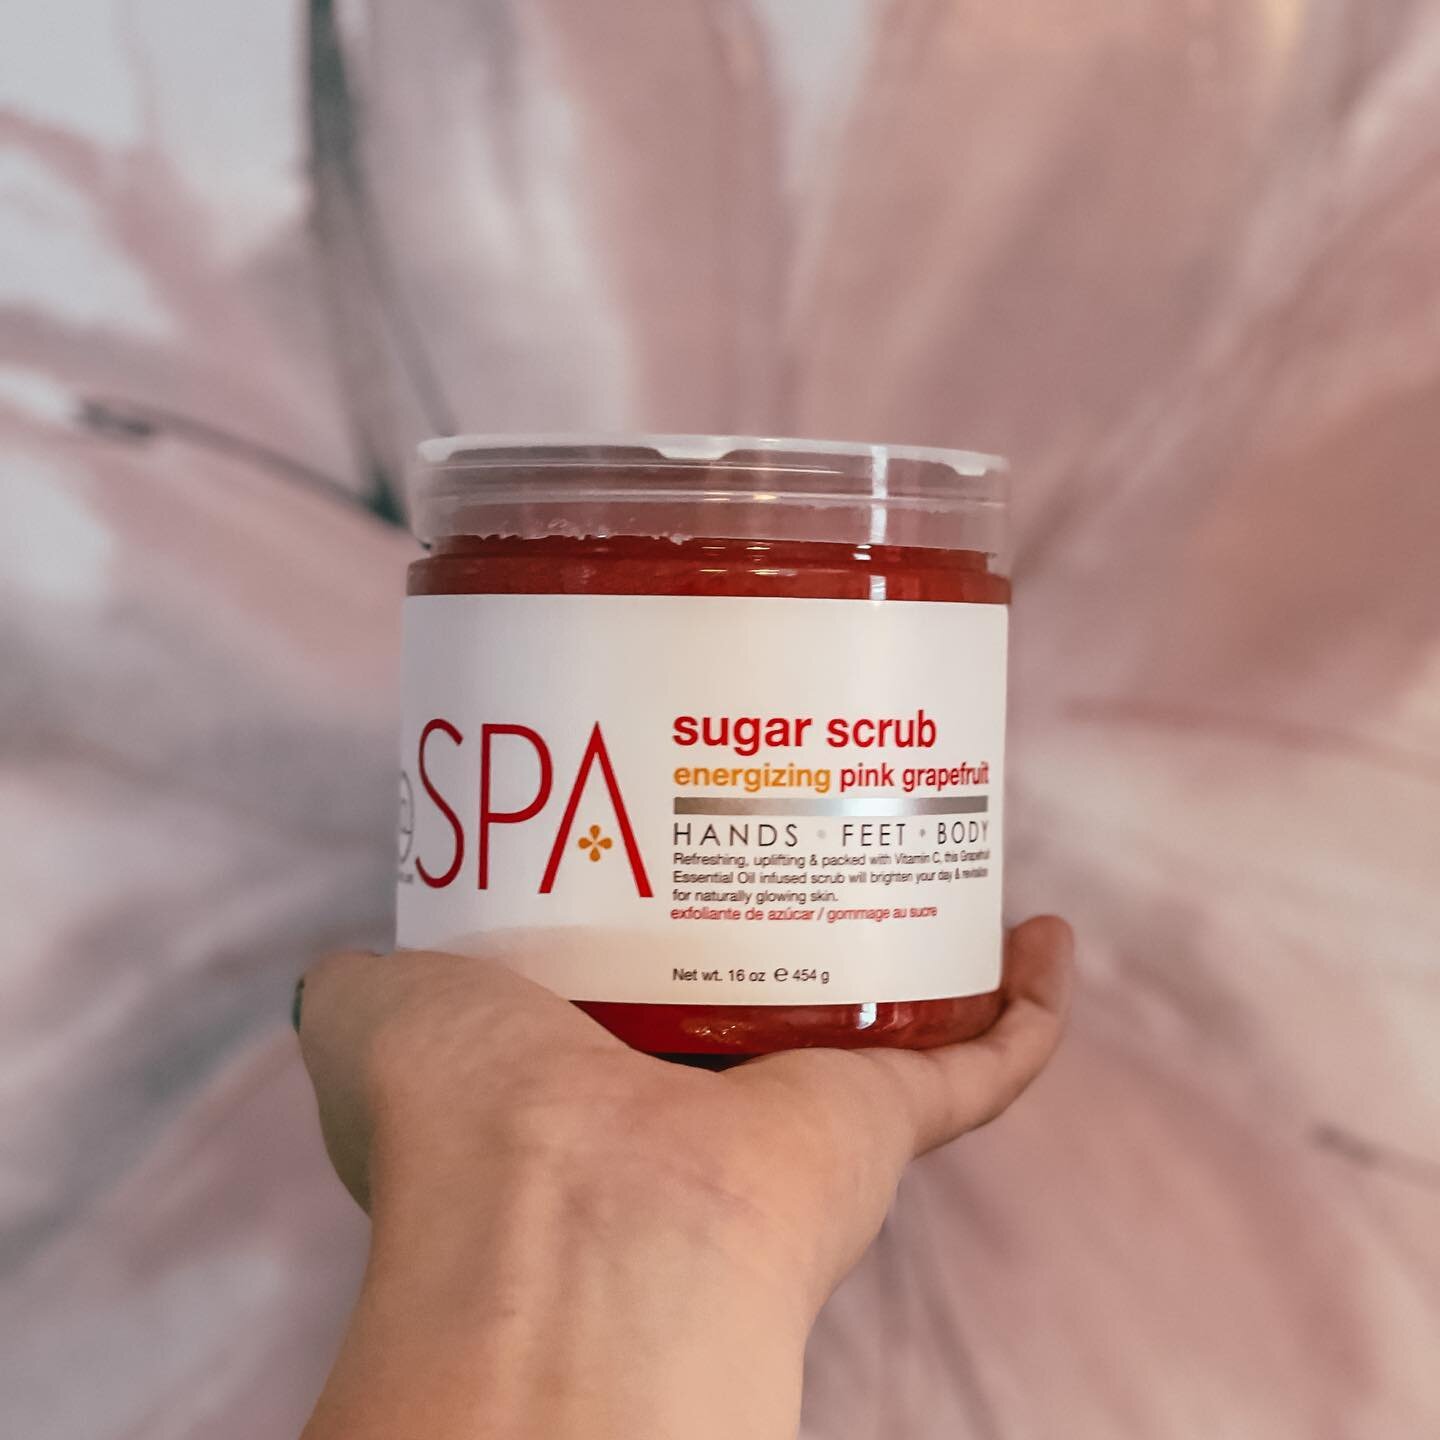 My ABSOLUTE fav body scrub!!⁣
⁣
Its natural sugar works to exfoliate dead cells from the skin, while the certified organic grapefruit, argan, olive and jojoba oils leave you velvety and glowing. Plus the smell Is DIVINE! ⁣You can find it on bclspa.co